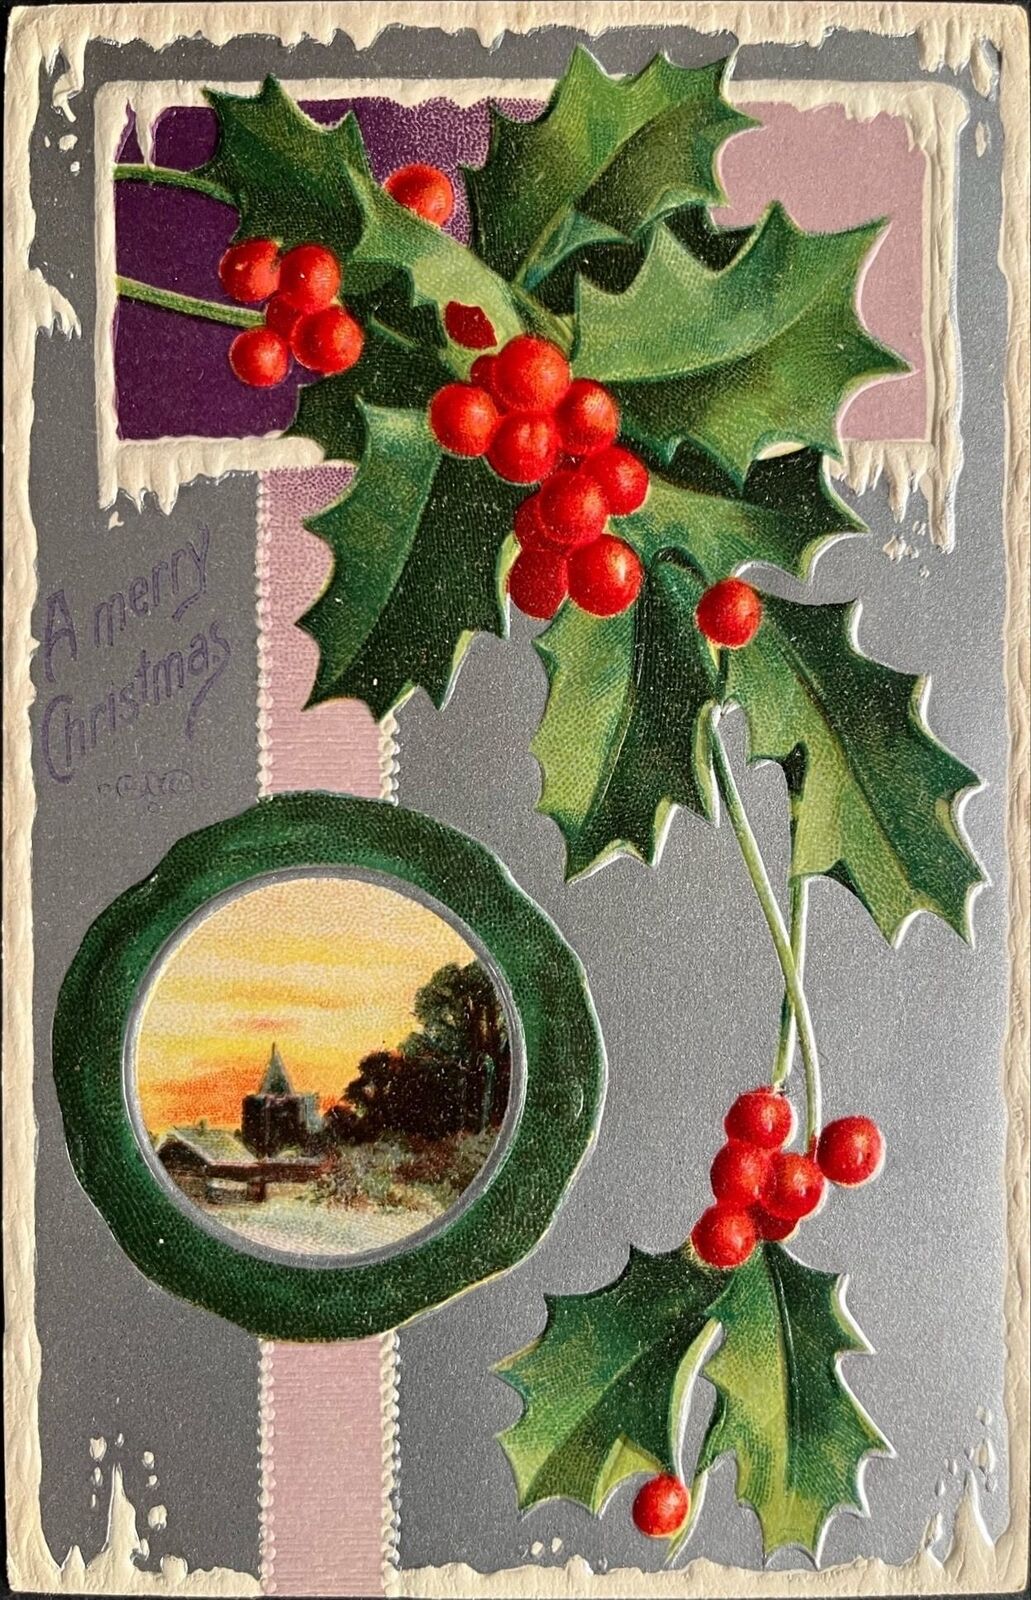 Neat Embossed, A Merry Christmas, Holly, 1910, Small view of village at sunset.